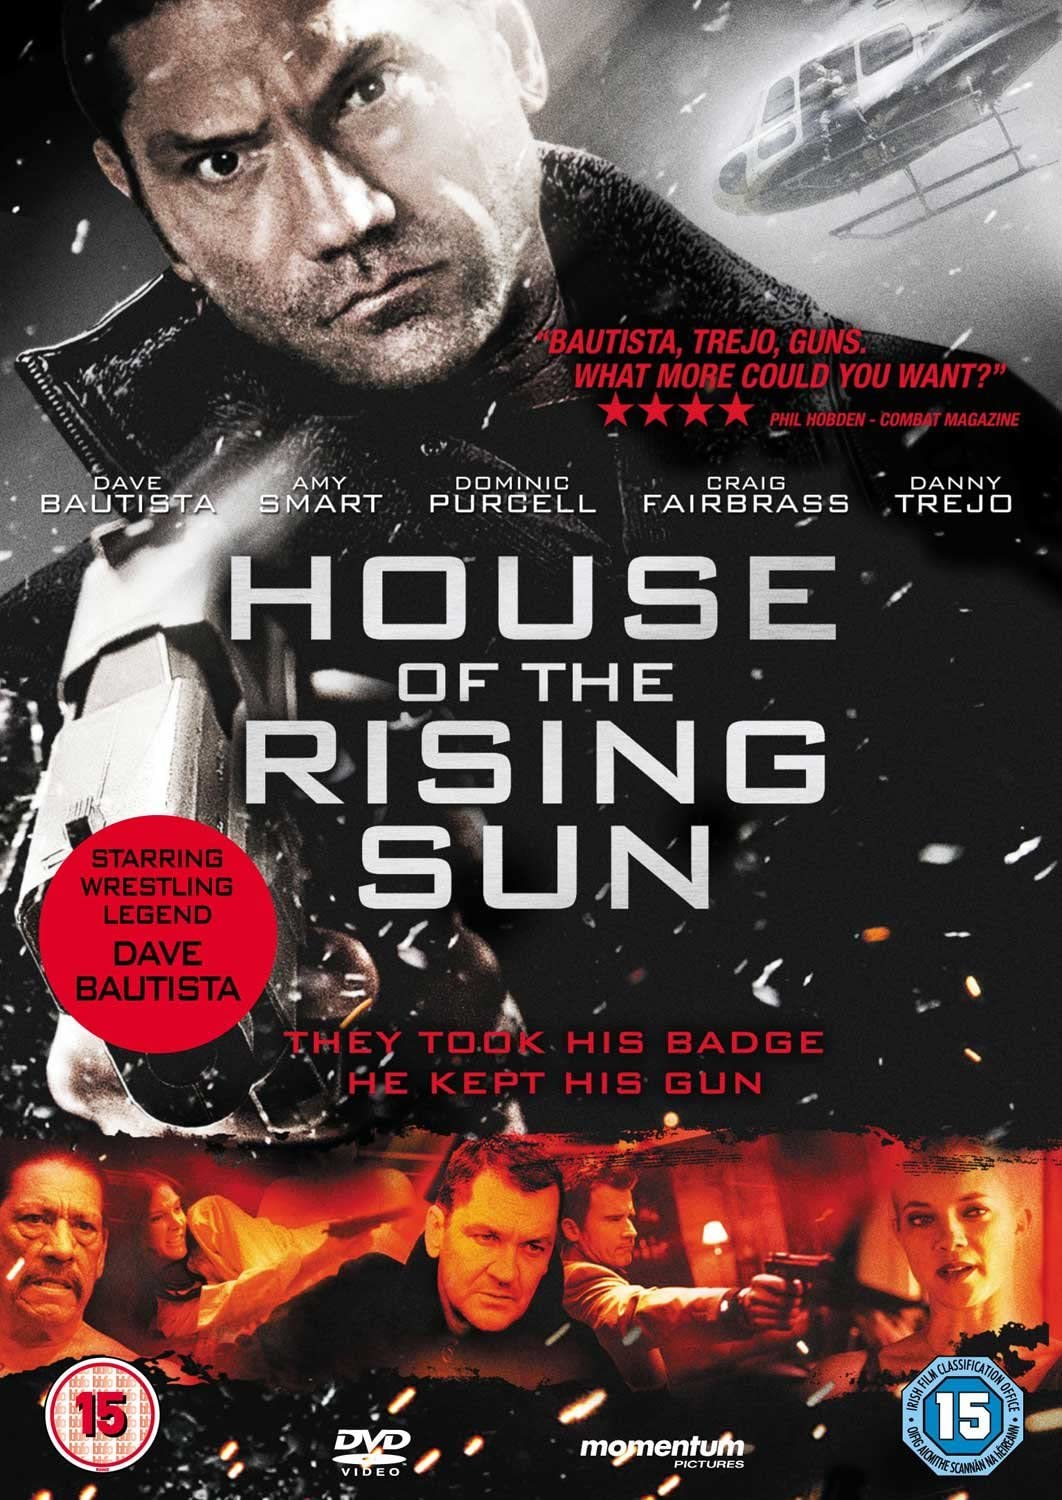 House of The Rising Sun - Action/Thriller [DVD]